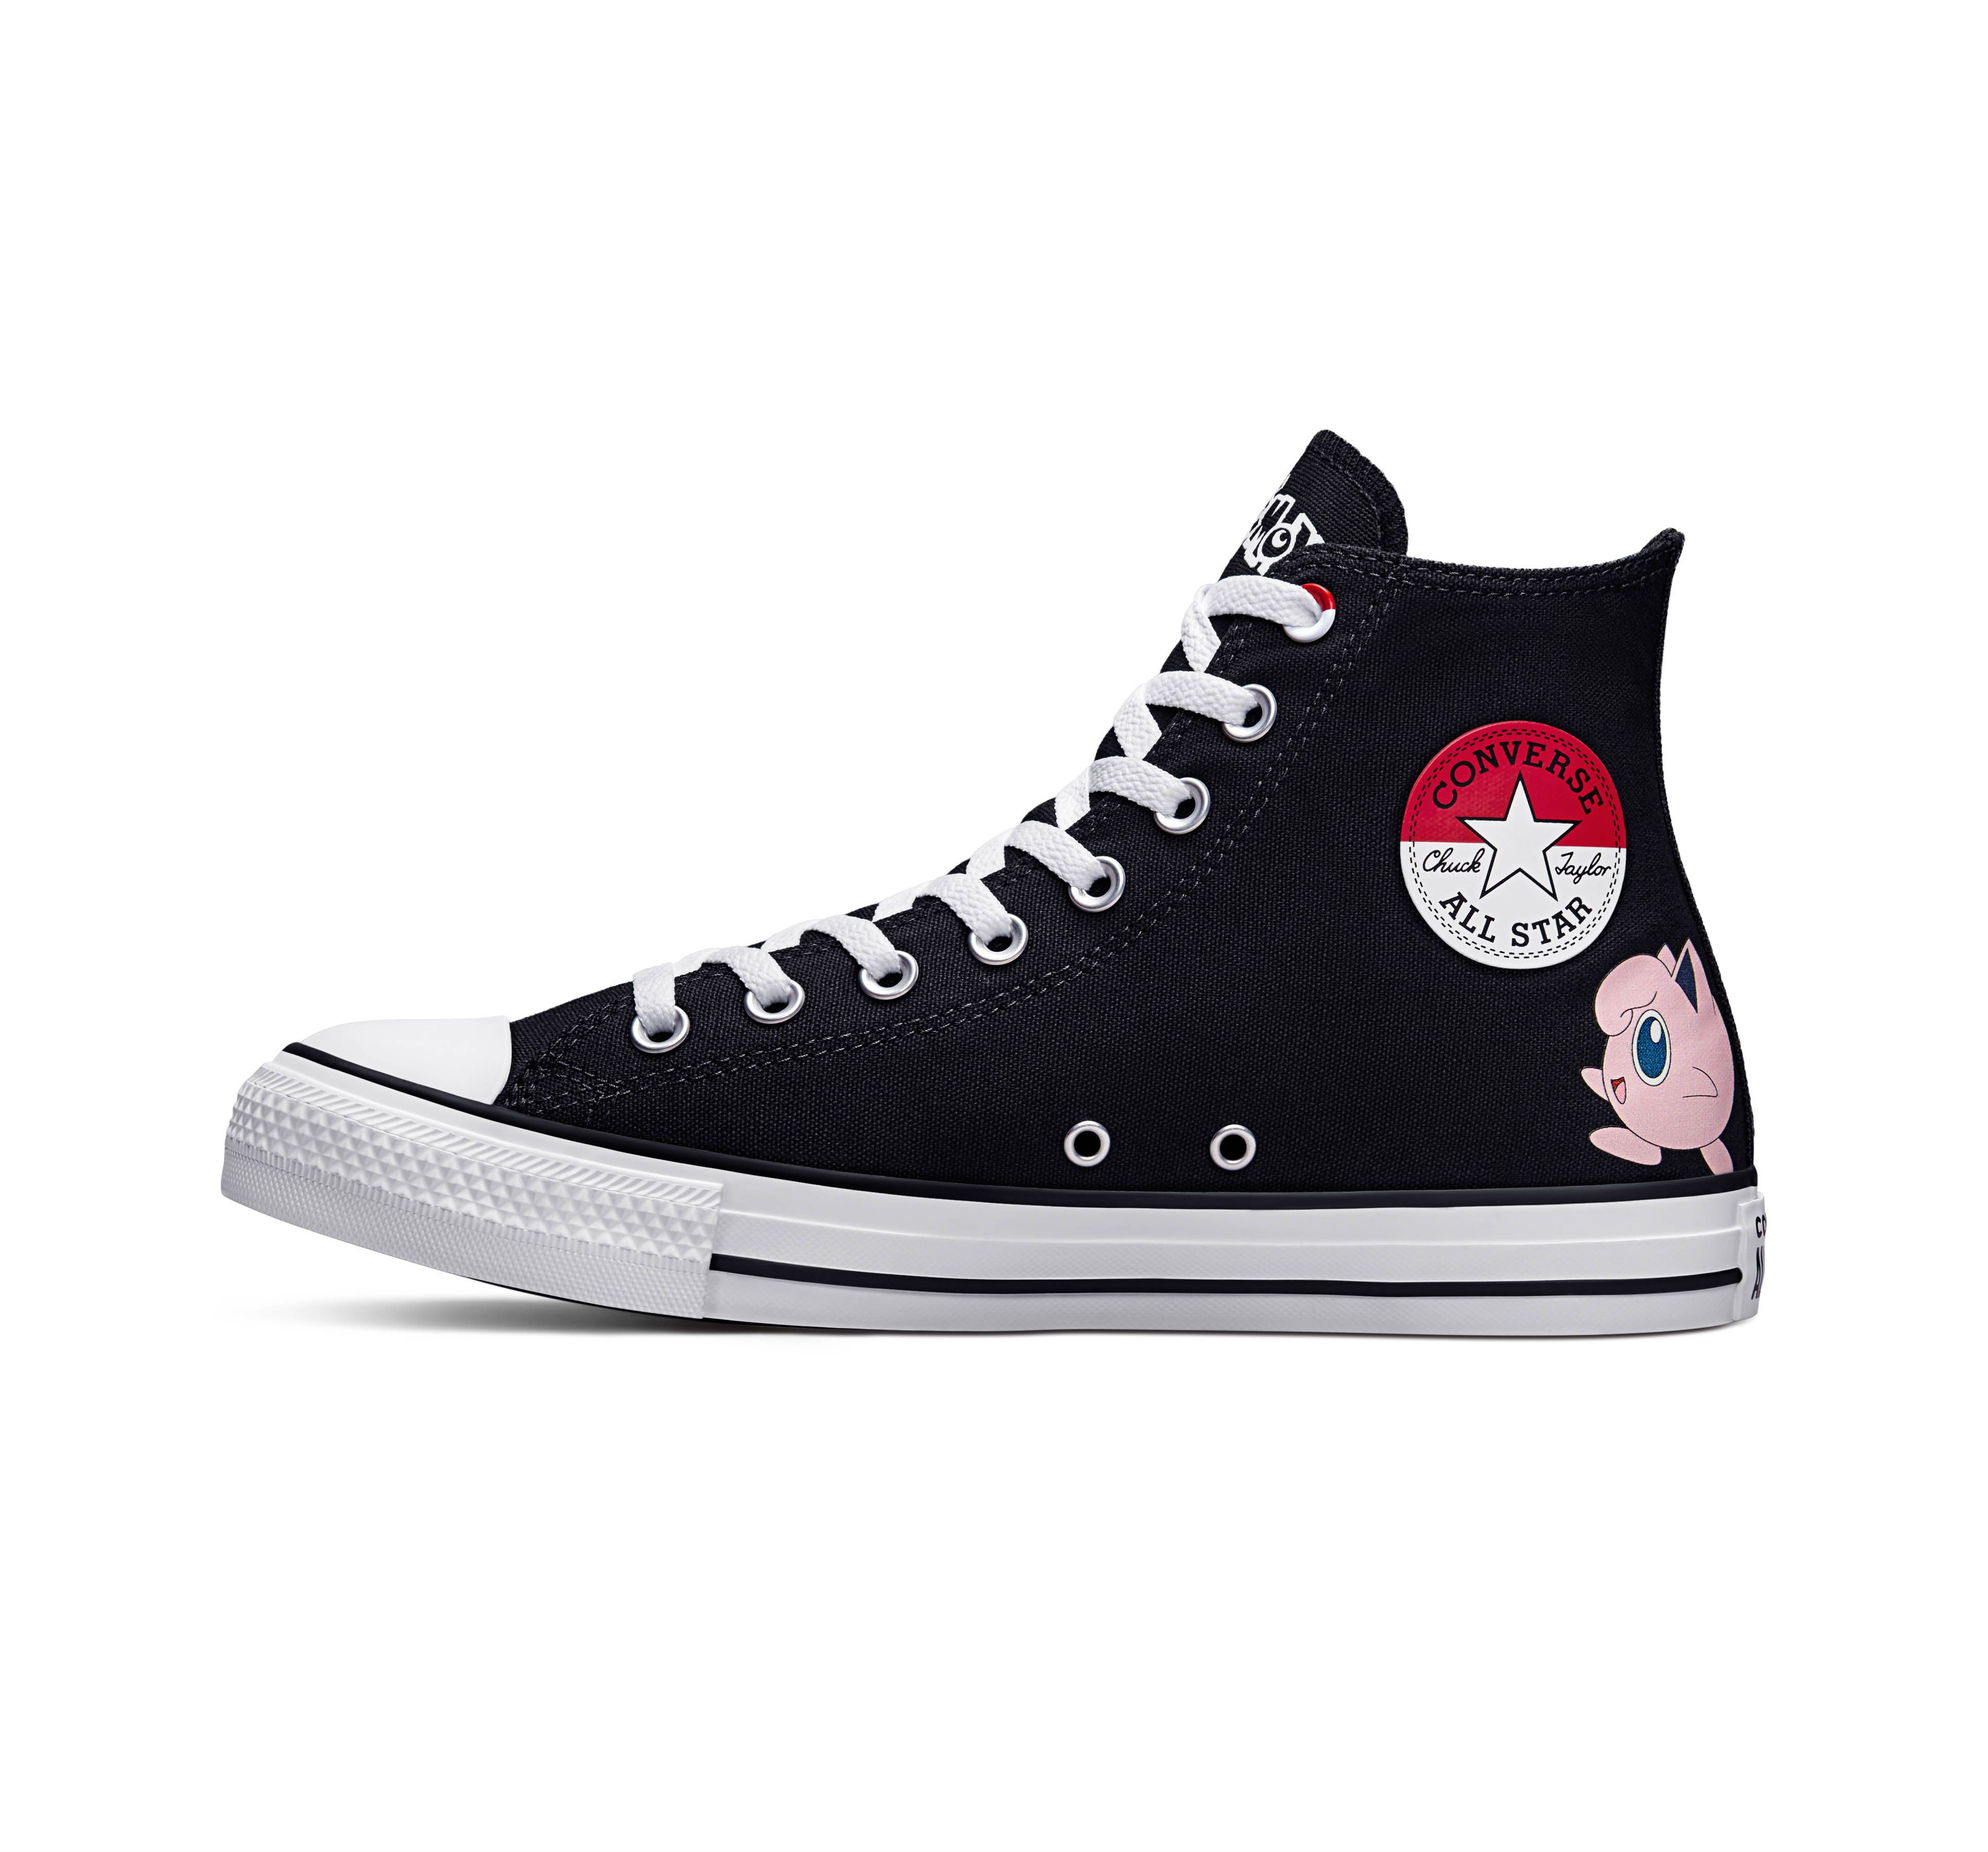 Pokémon and Converse Team Up for Shoe Collection